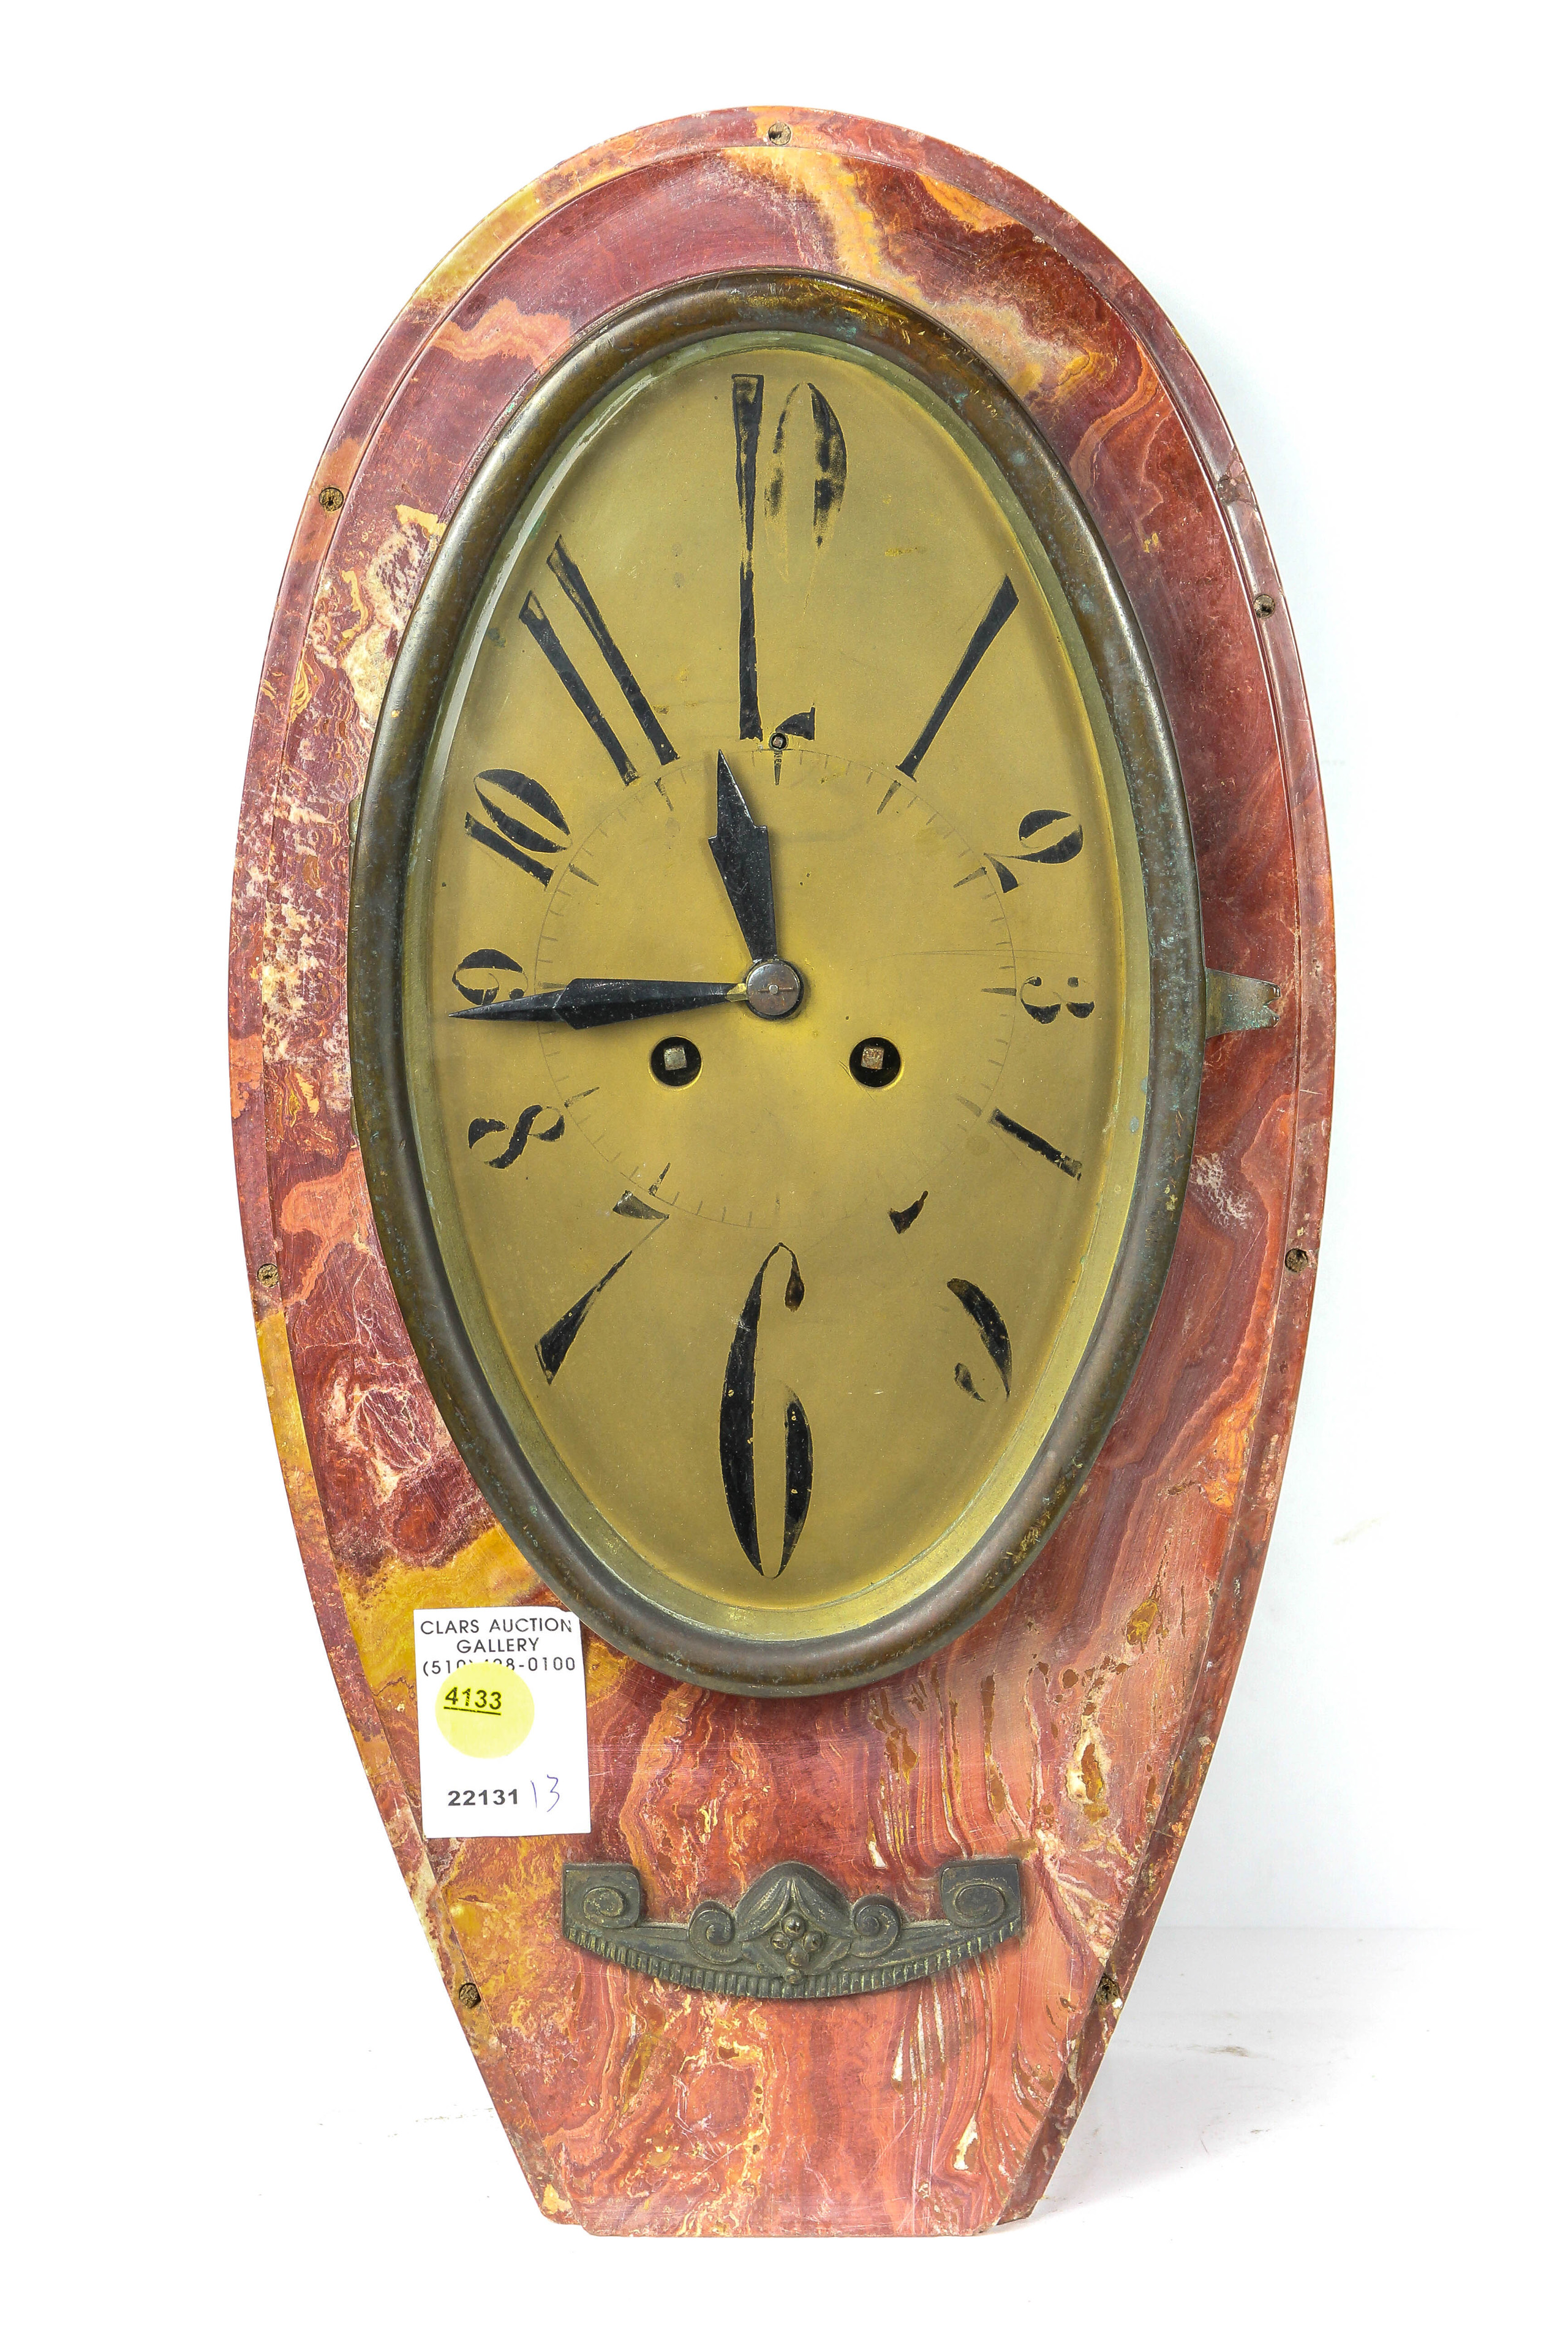 FRENCH ART DECO MARBLE CASED CLOCK 3a65f6